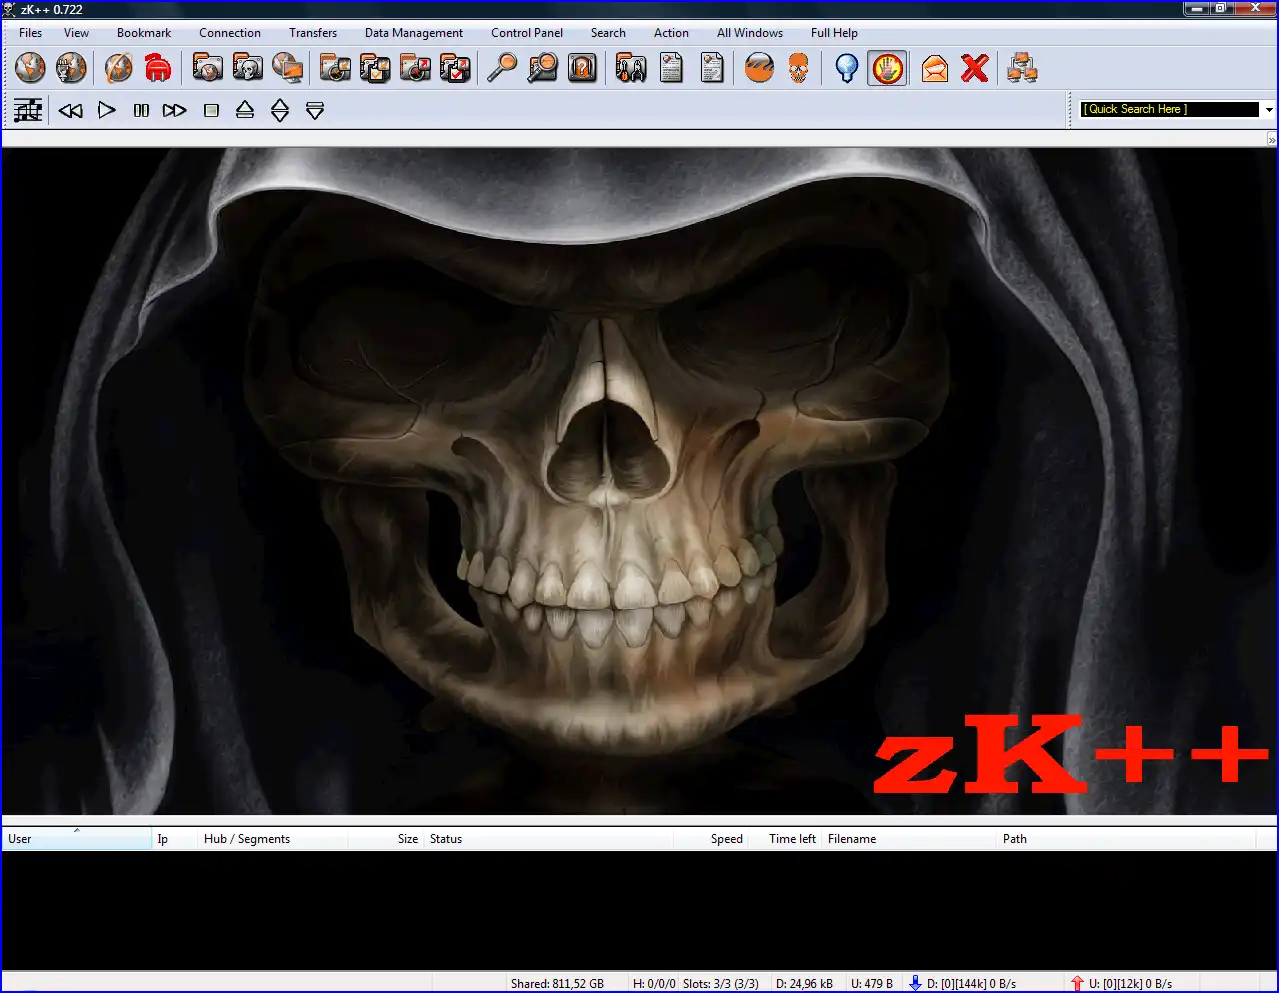 Download web tool or web app zK++